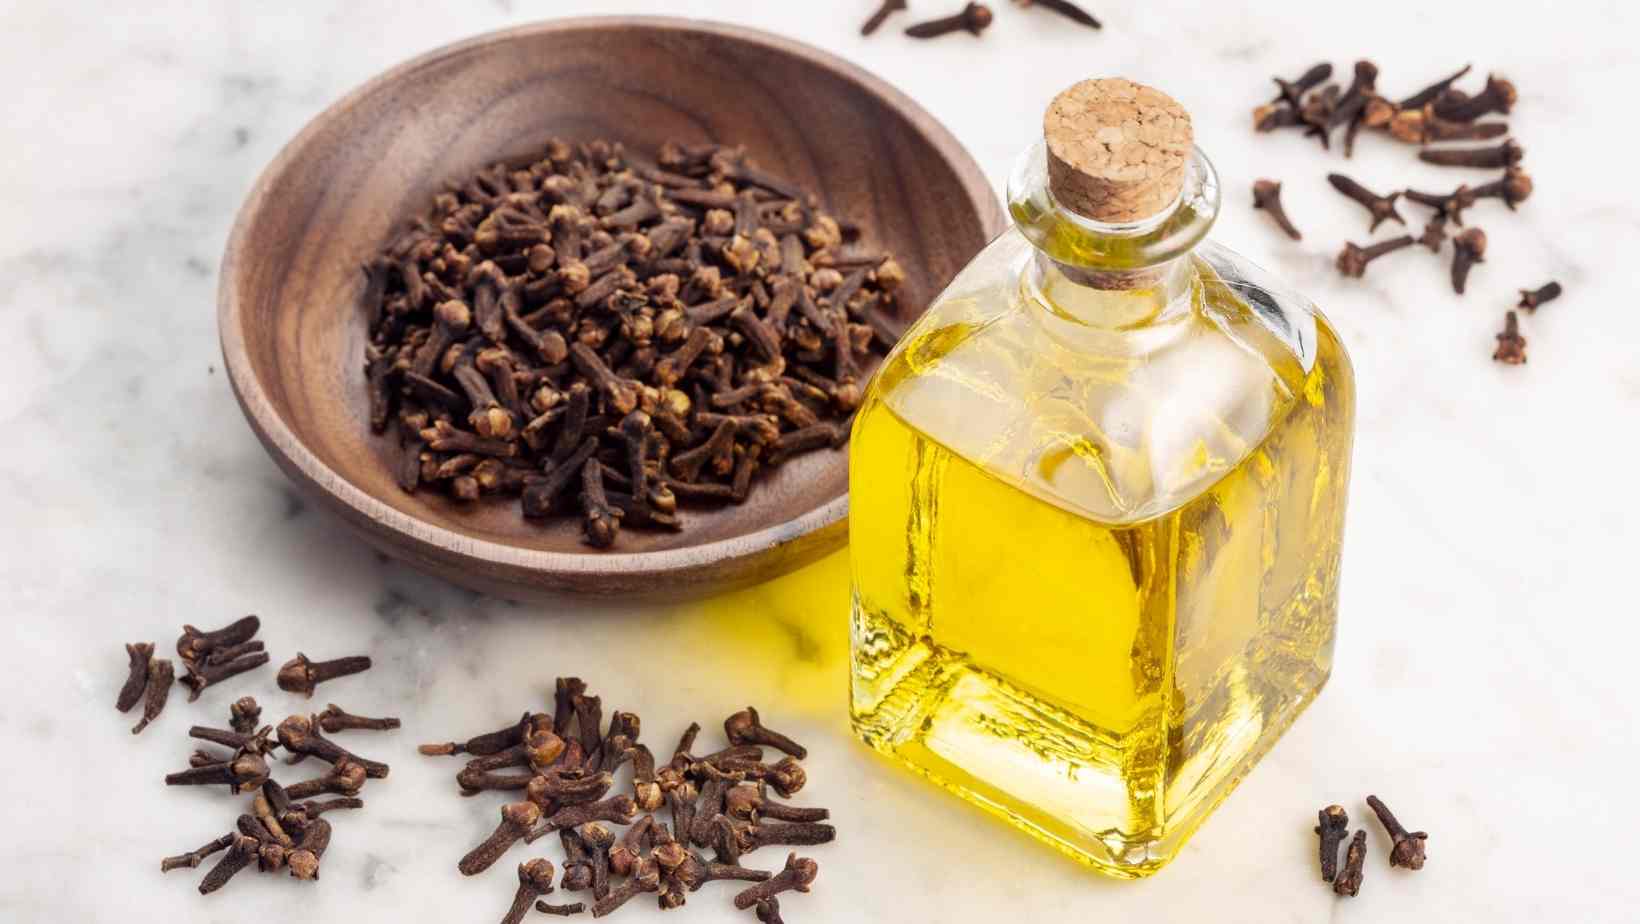 Clove - Spices Really Benefit Your Health